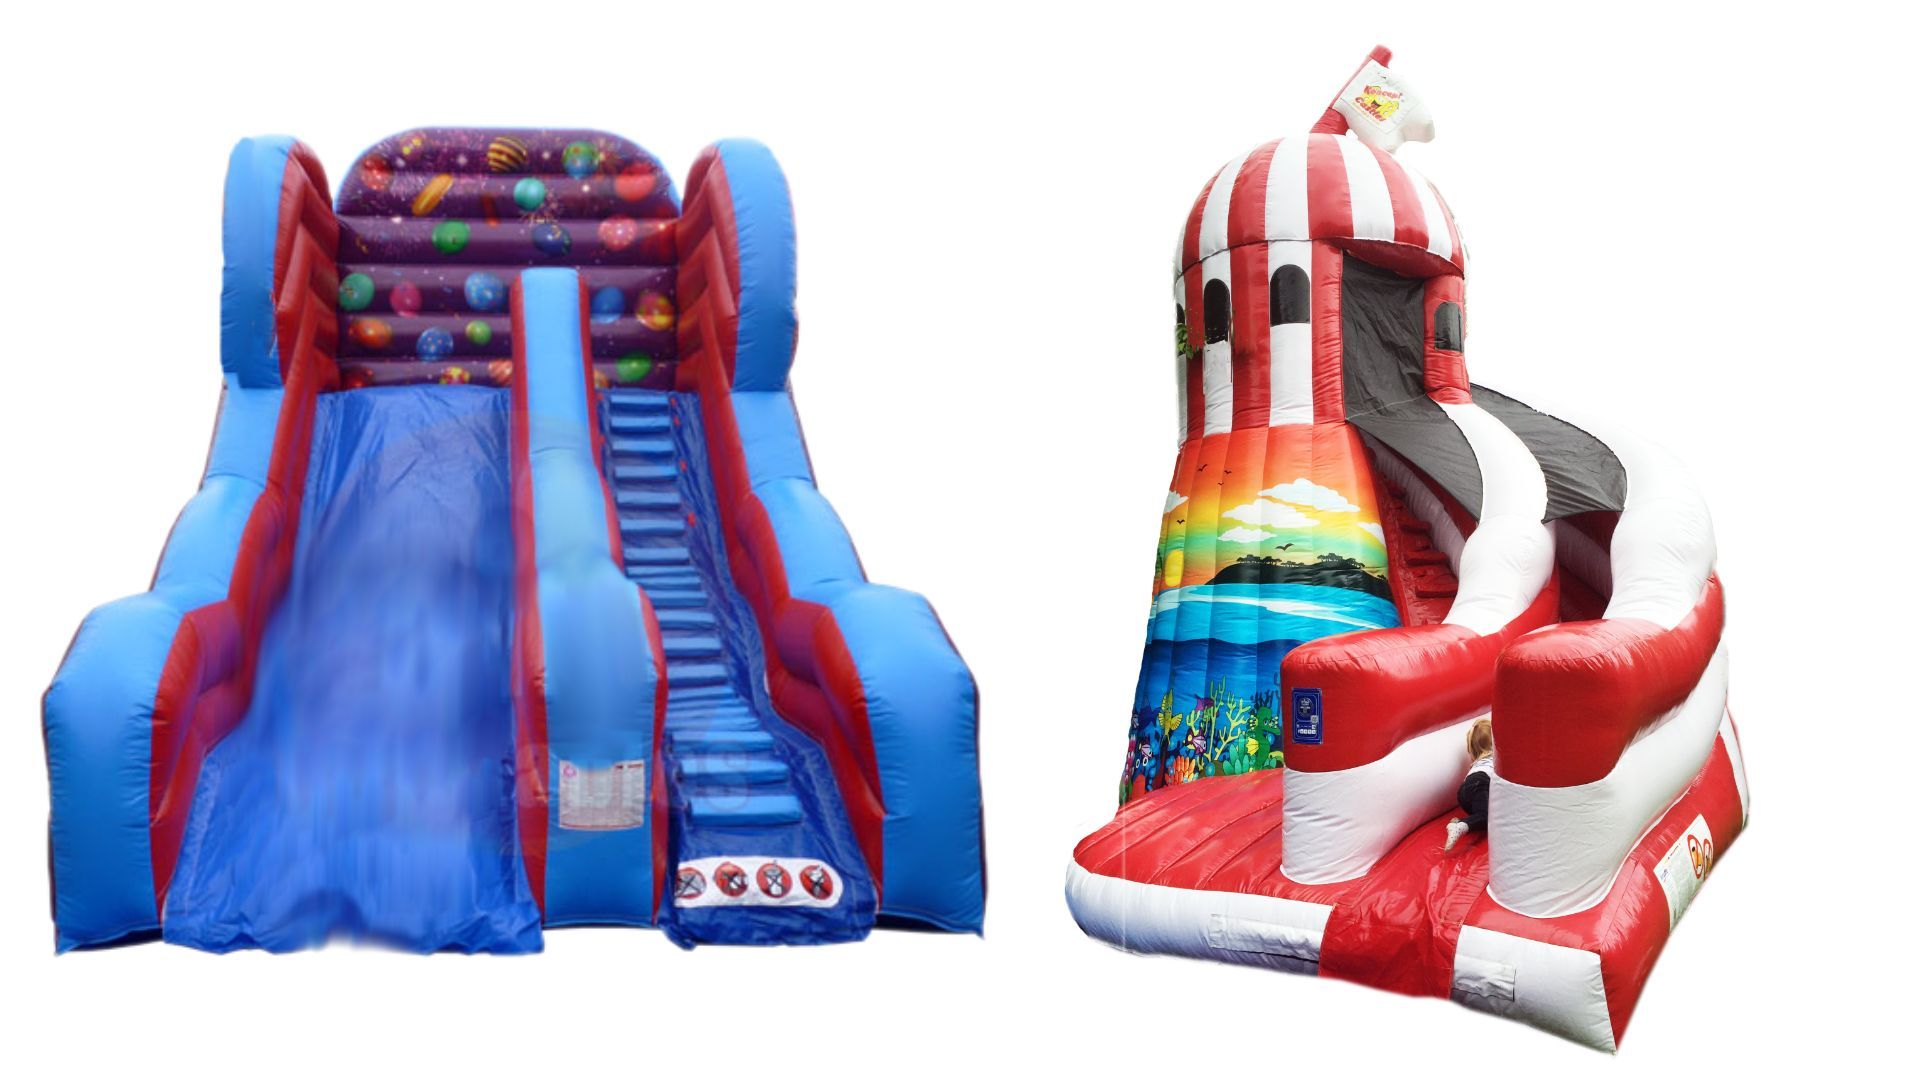 12ft Celebration slide red and blue with colour balloons, helter skelter slide red and while with a beach theme and dont forget to look out for the flag on the top, rush slide red and black with a extreme drop of a slide and our party slide blue and purple.